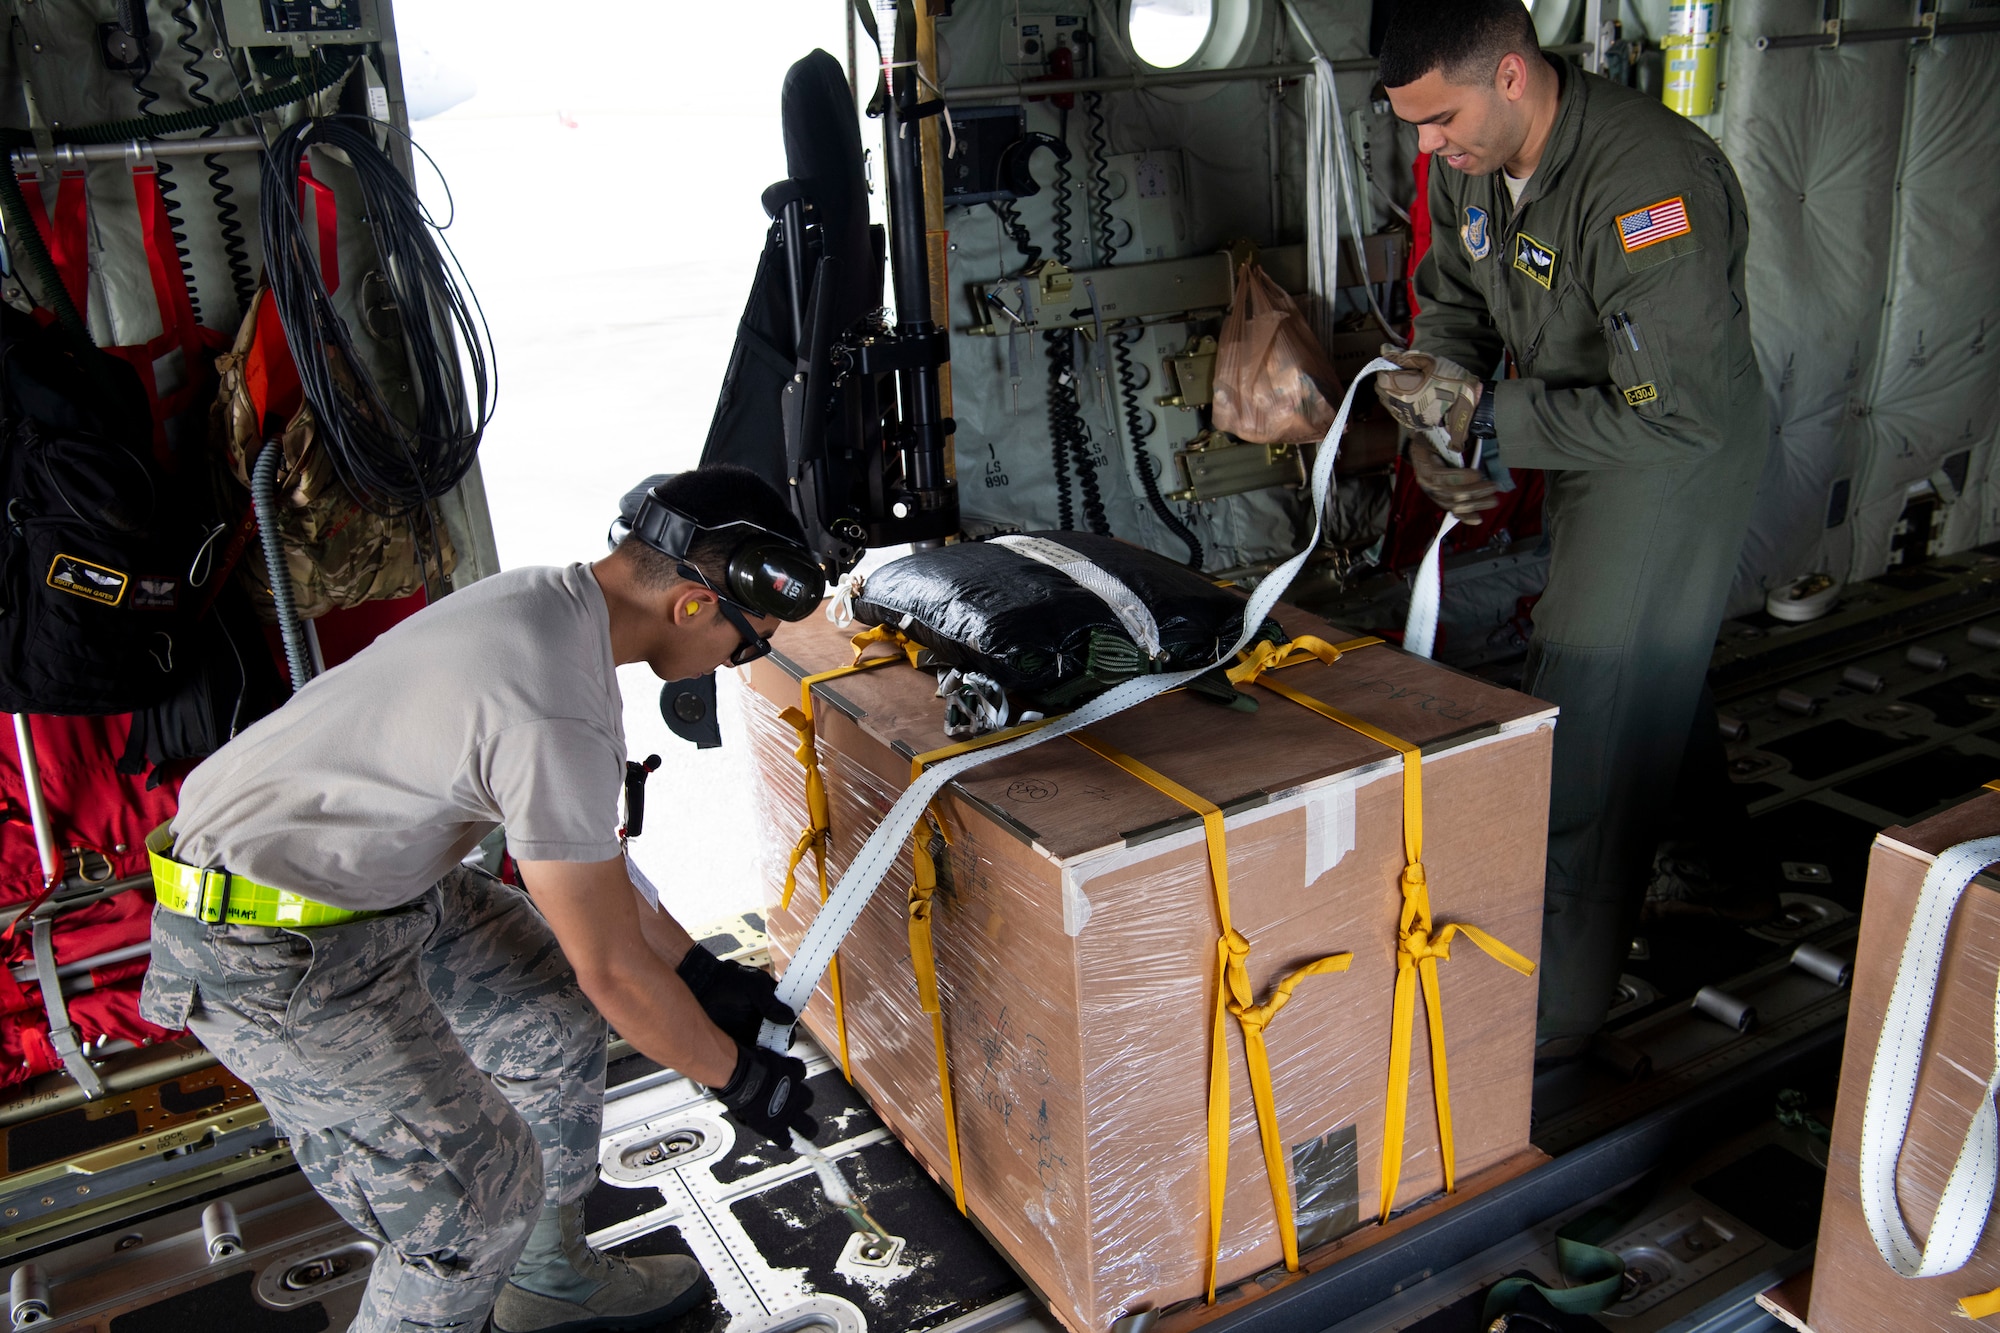 U.S. Air Force Airman 1st Class Joshua San Agustin (left to right), an air transportation specialist with the U.S. Air Force Reserve’s 44th Aerial Port Squadron, and Staff Sgt. Brian Gates, a loadmaster with the 374th Airlift Wing at Yokota Air Base, Japan, load a U.S. Air Force C-130J Hercules Dec. 11, 2018, with an airdrop bundle during Operation Christmas Drop at Andersen Air Force Base, Guam. Operation Christmas Drop is a U.S. Air Force-led trilateral training event that includes air support from the Japanese Air Self Defense Force and Royal Australian Air Force to airdrop supplies to the Commonwealth of the Northern Marianas, Federated States of Micronesia, and the Republic of Palau. (U.S. Air Force photo by Jerry R. Bynum)